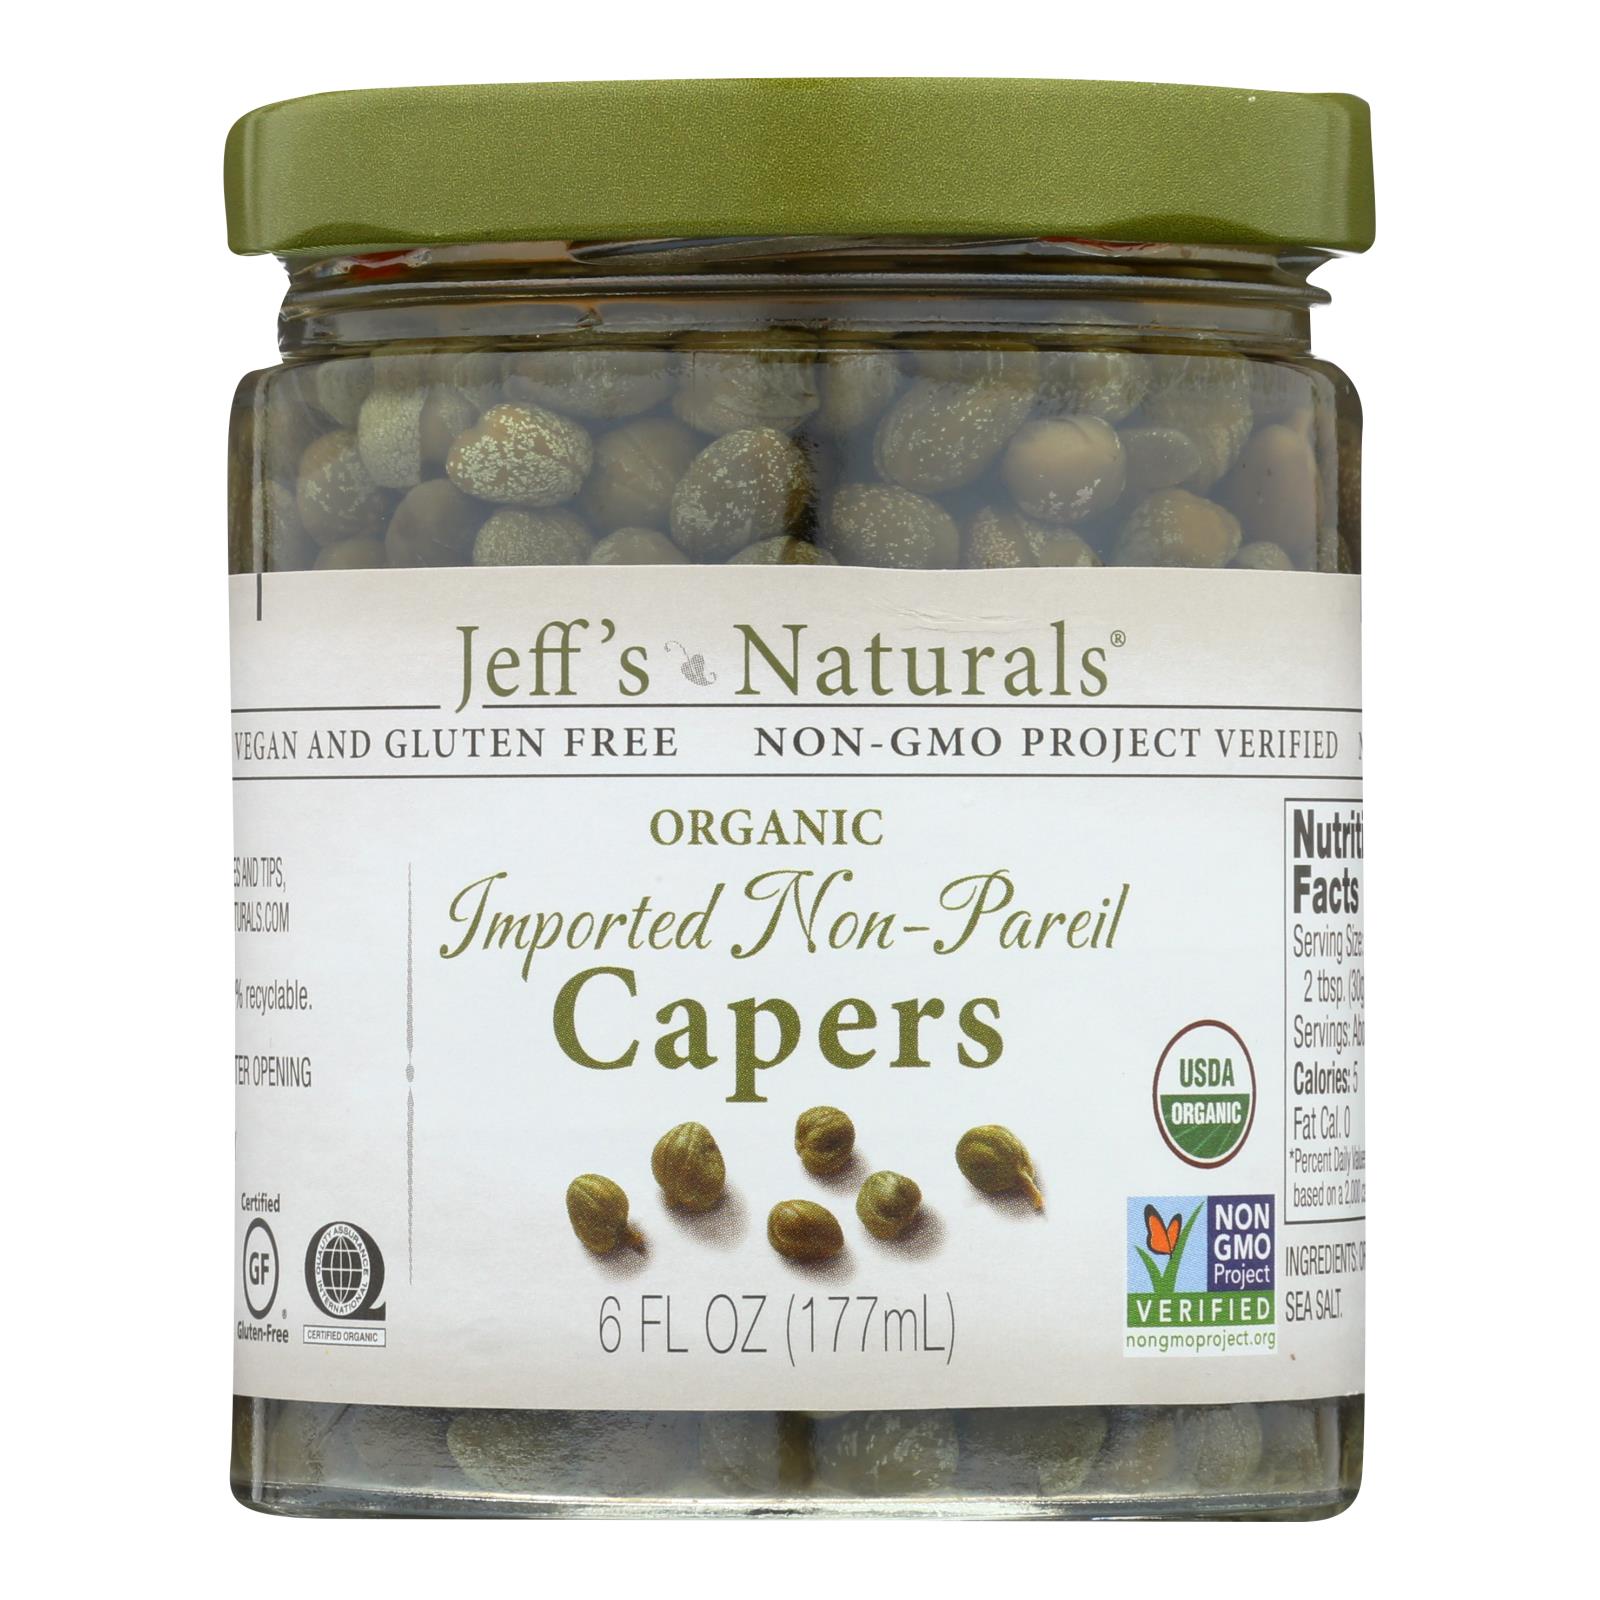 Jeff's Natural Jeff's Natural Imported Non Pareil Capers - Capers - 6개 묶음상품 - 6 oz.